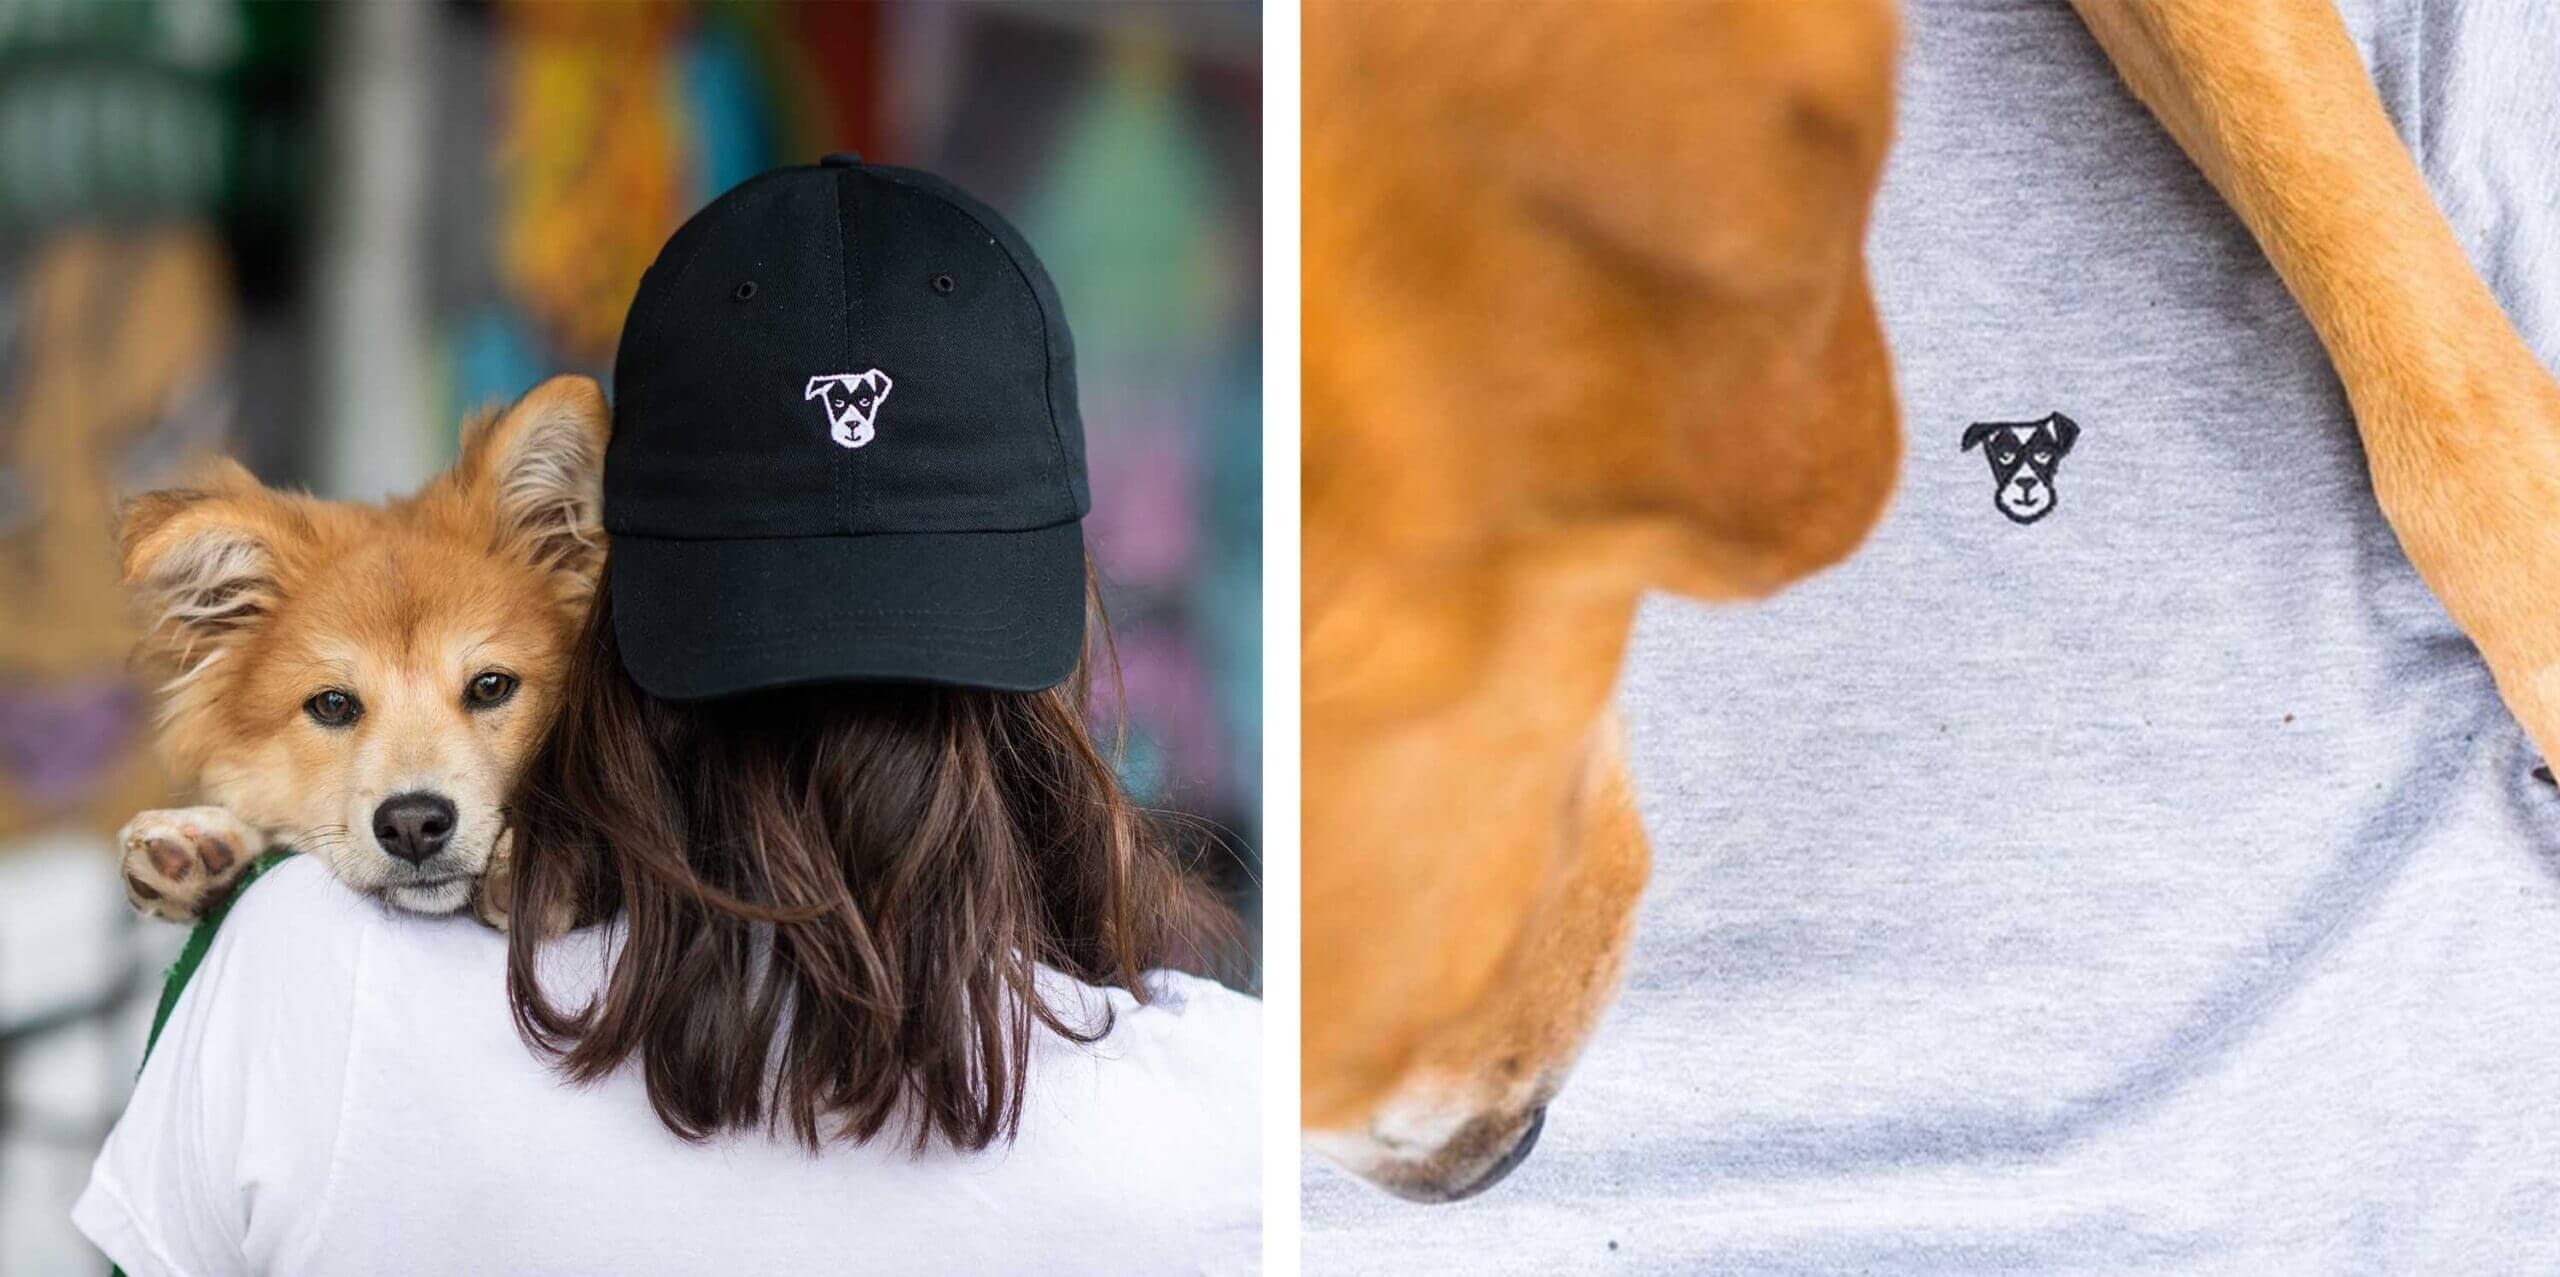 A collage of Dogish branded clothing